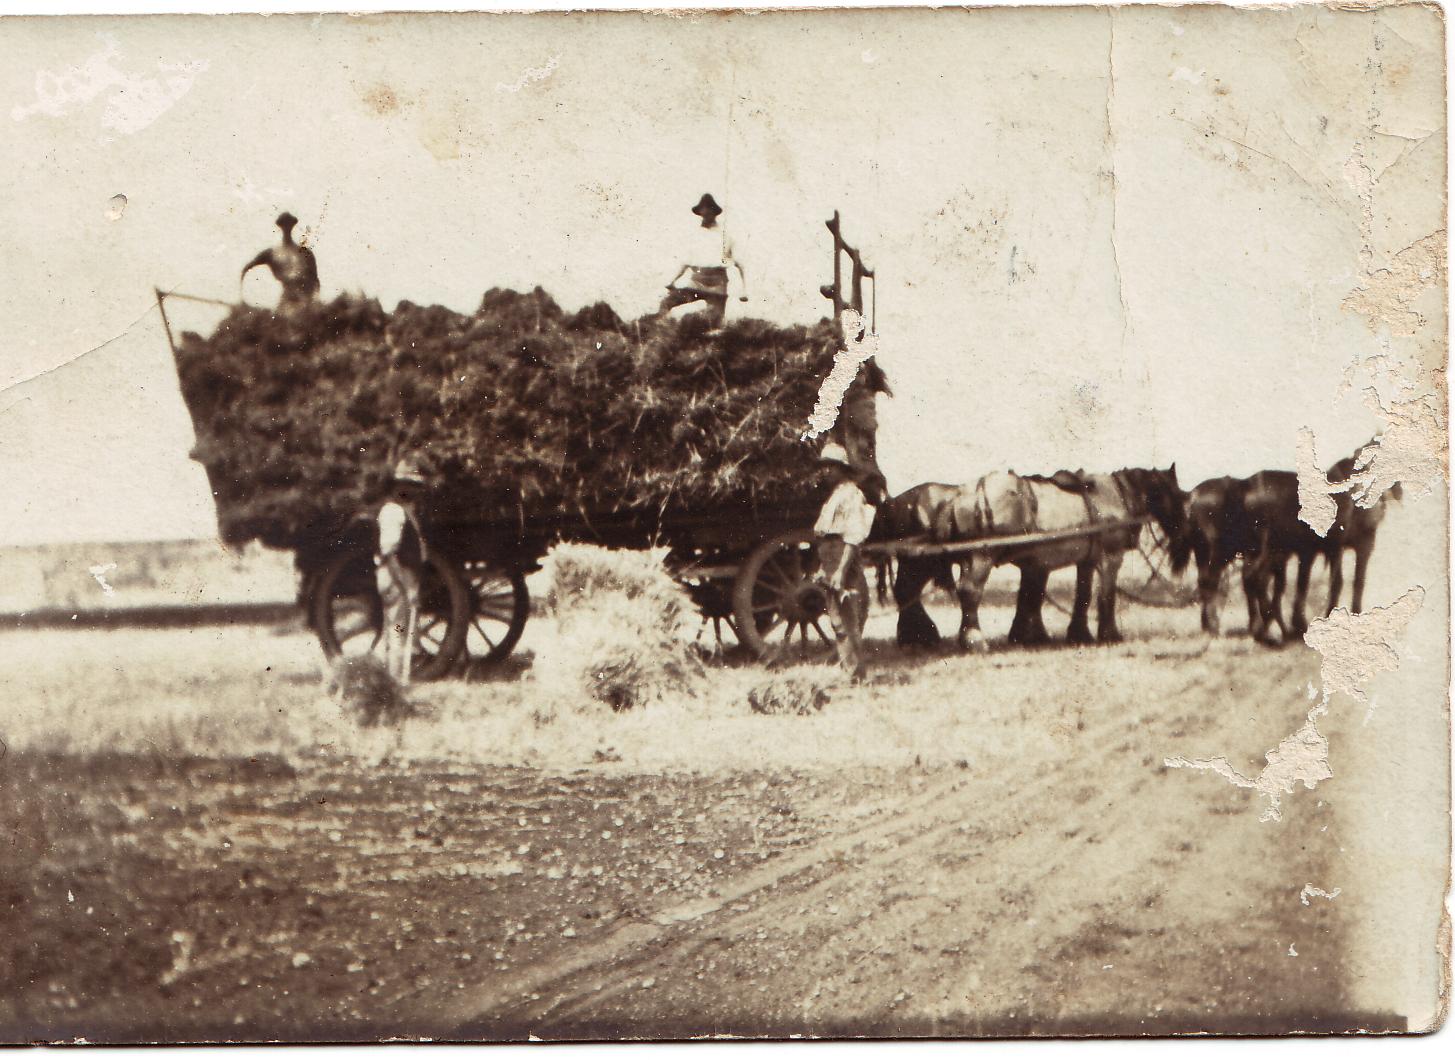 Adelaide Research & Scholarship: Loading Hay c1900